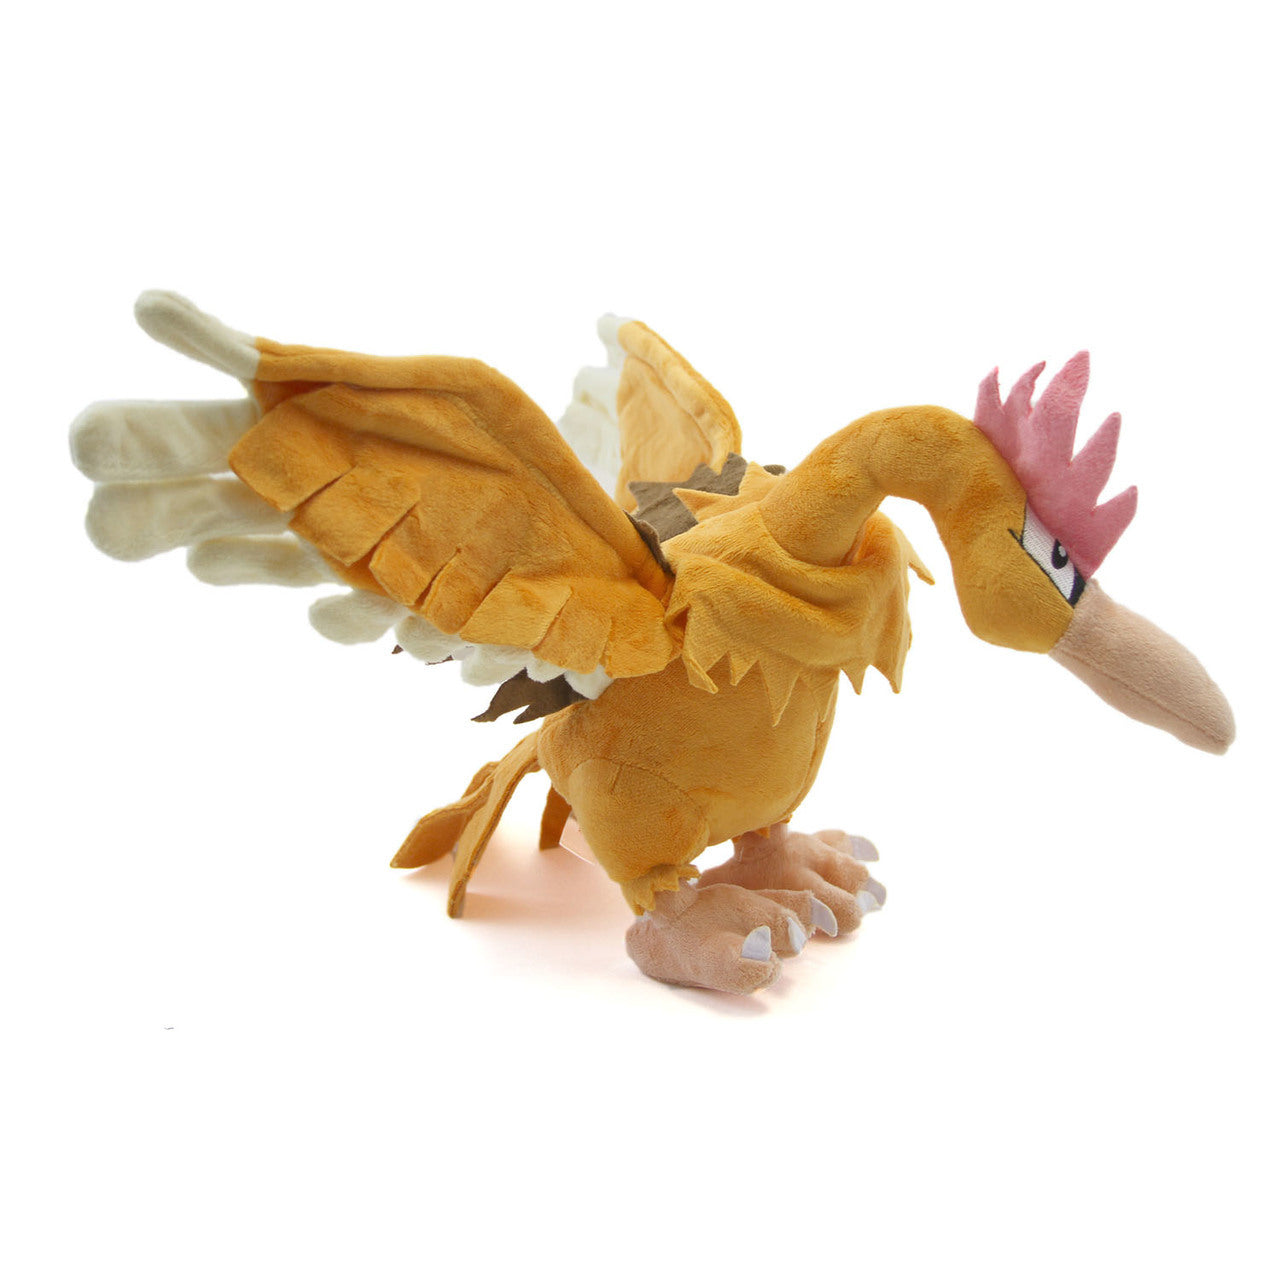 Fearow Plush Doll - Super Anime Store FREE SHIPPING FAST SHIPPING USA